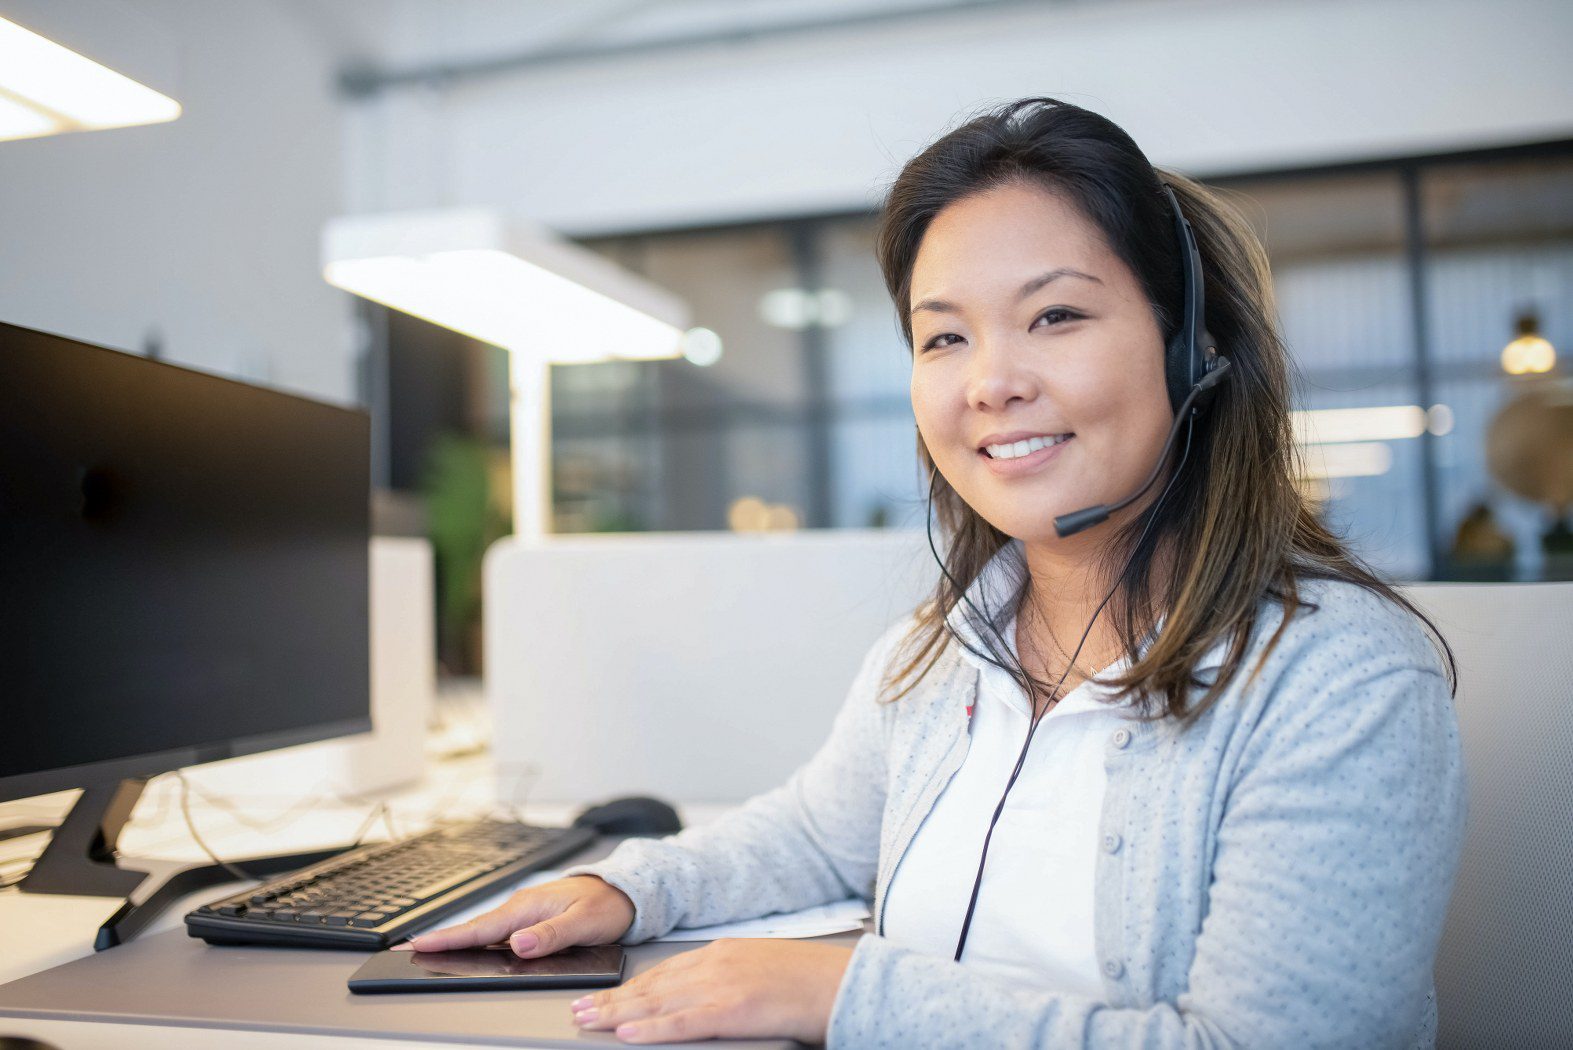 business answering service improves sales